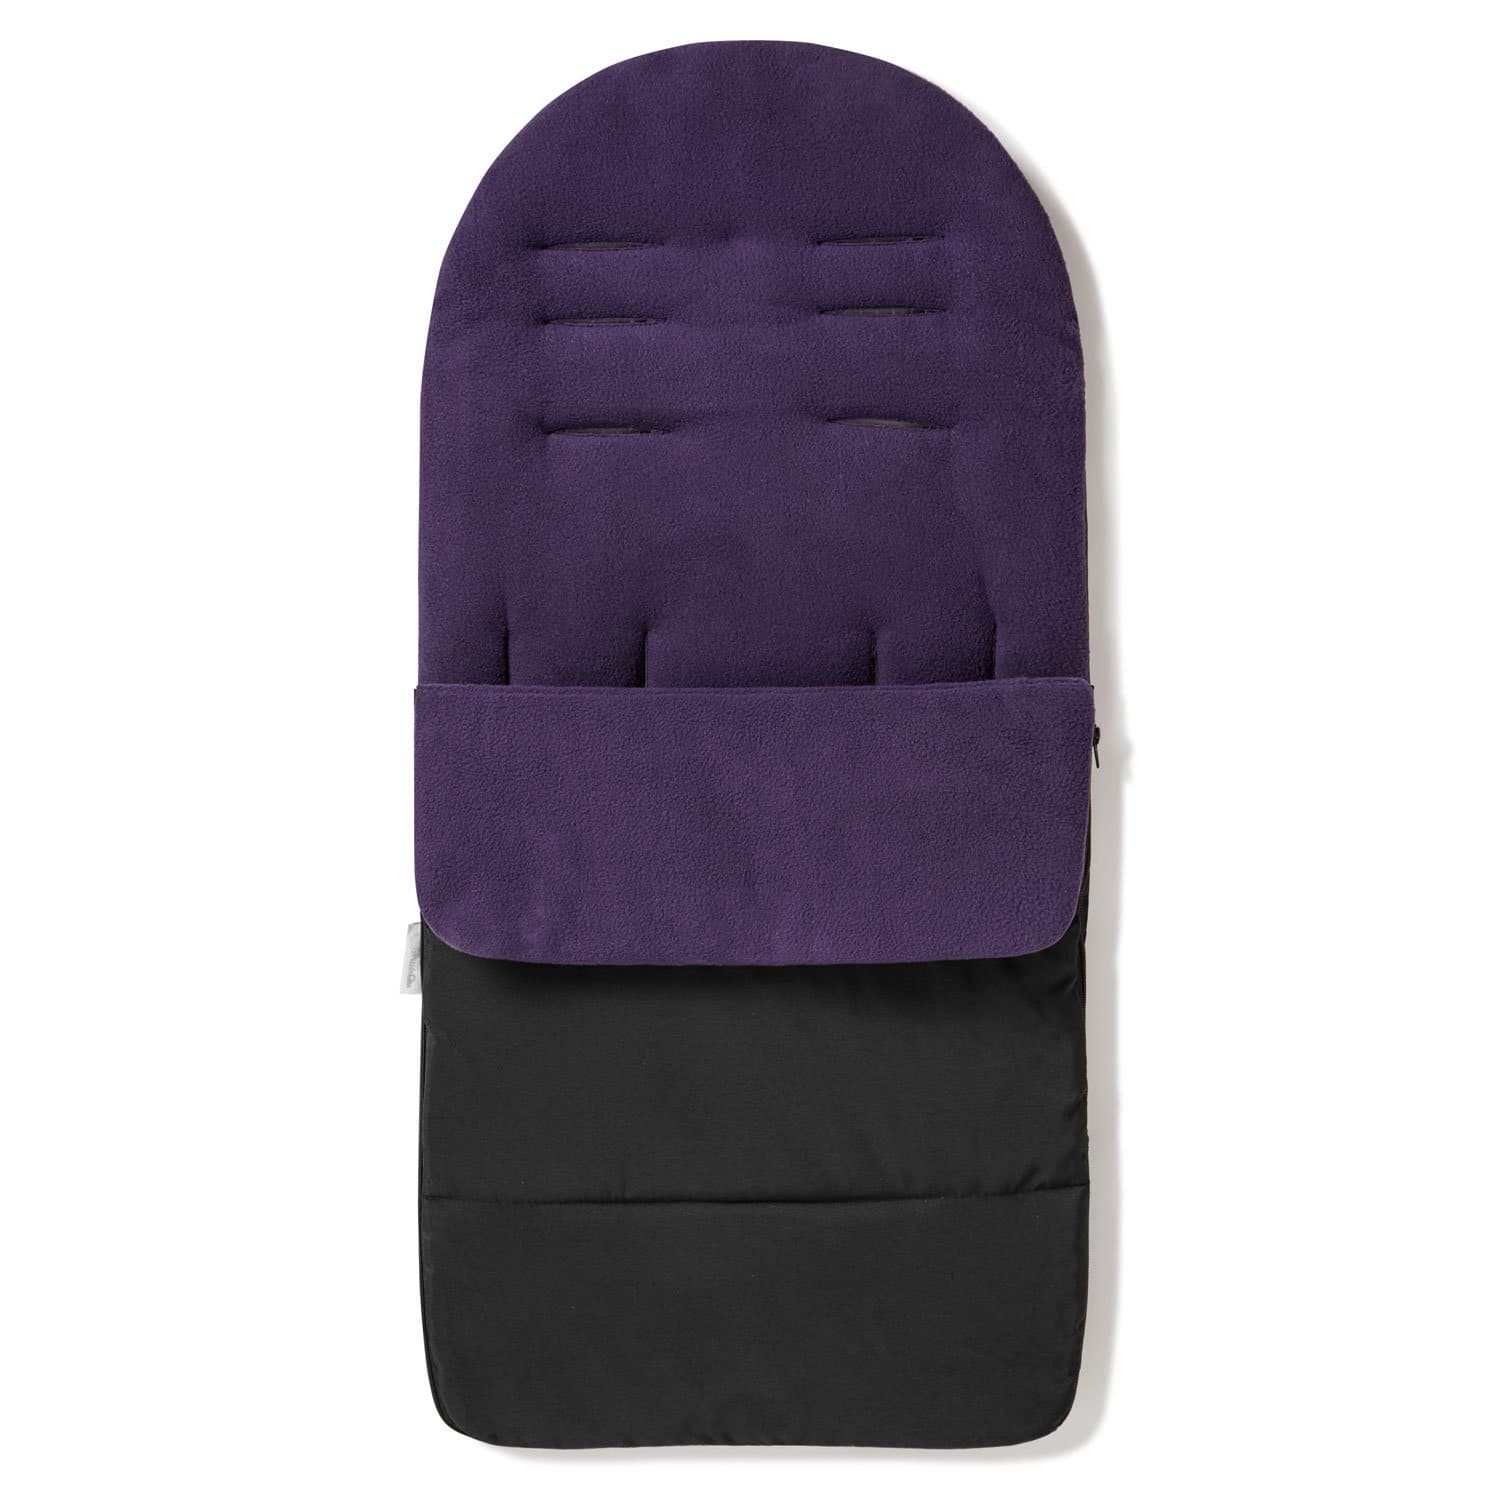 Premium Footmuff / Cosy Toes Compatible with Graco - Plum Purple / Fits All Models | For Your Little One